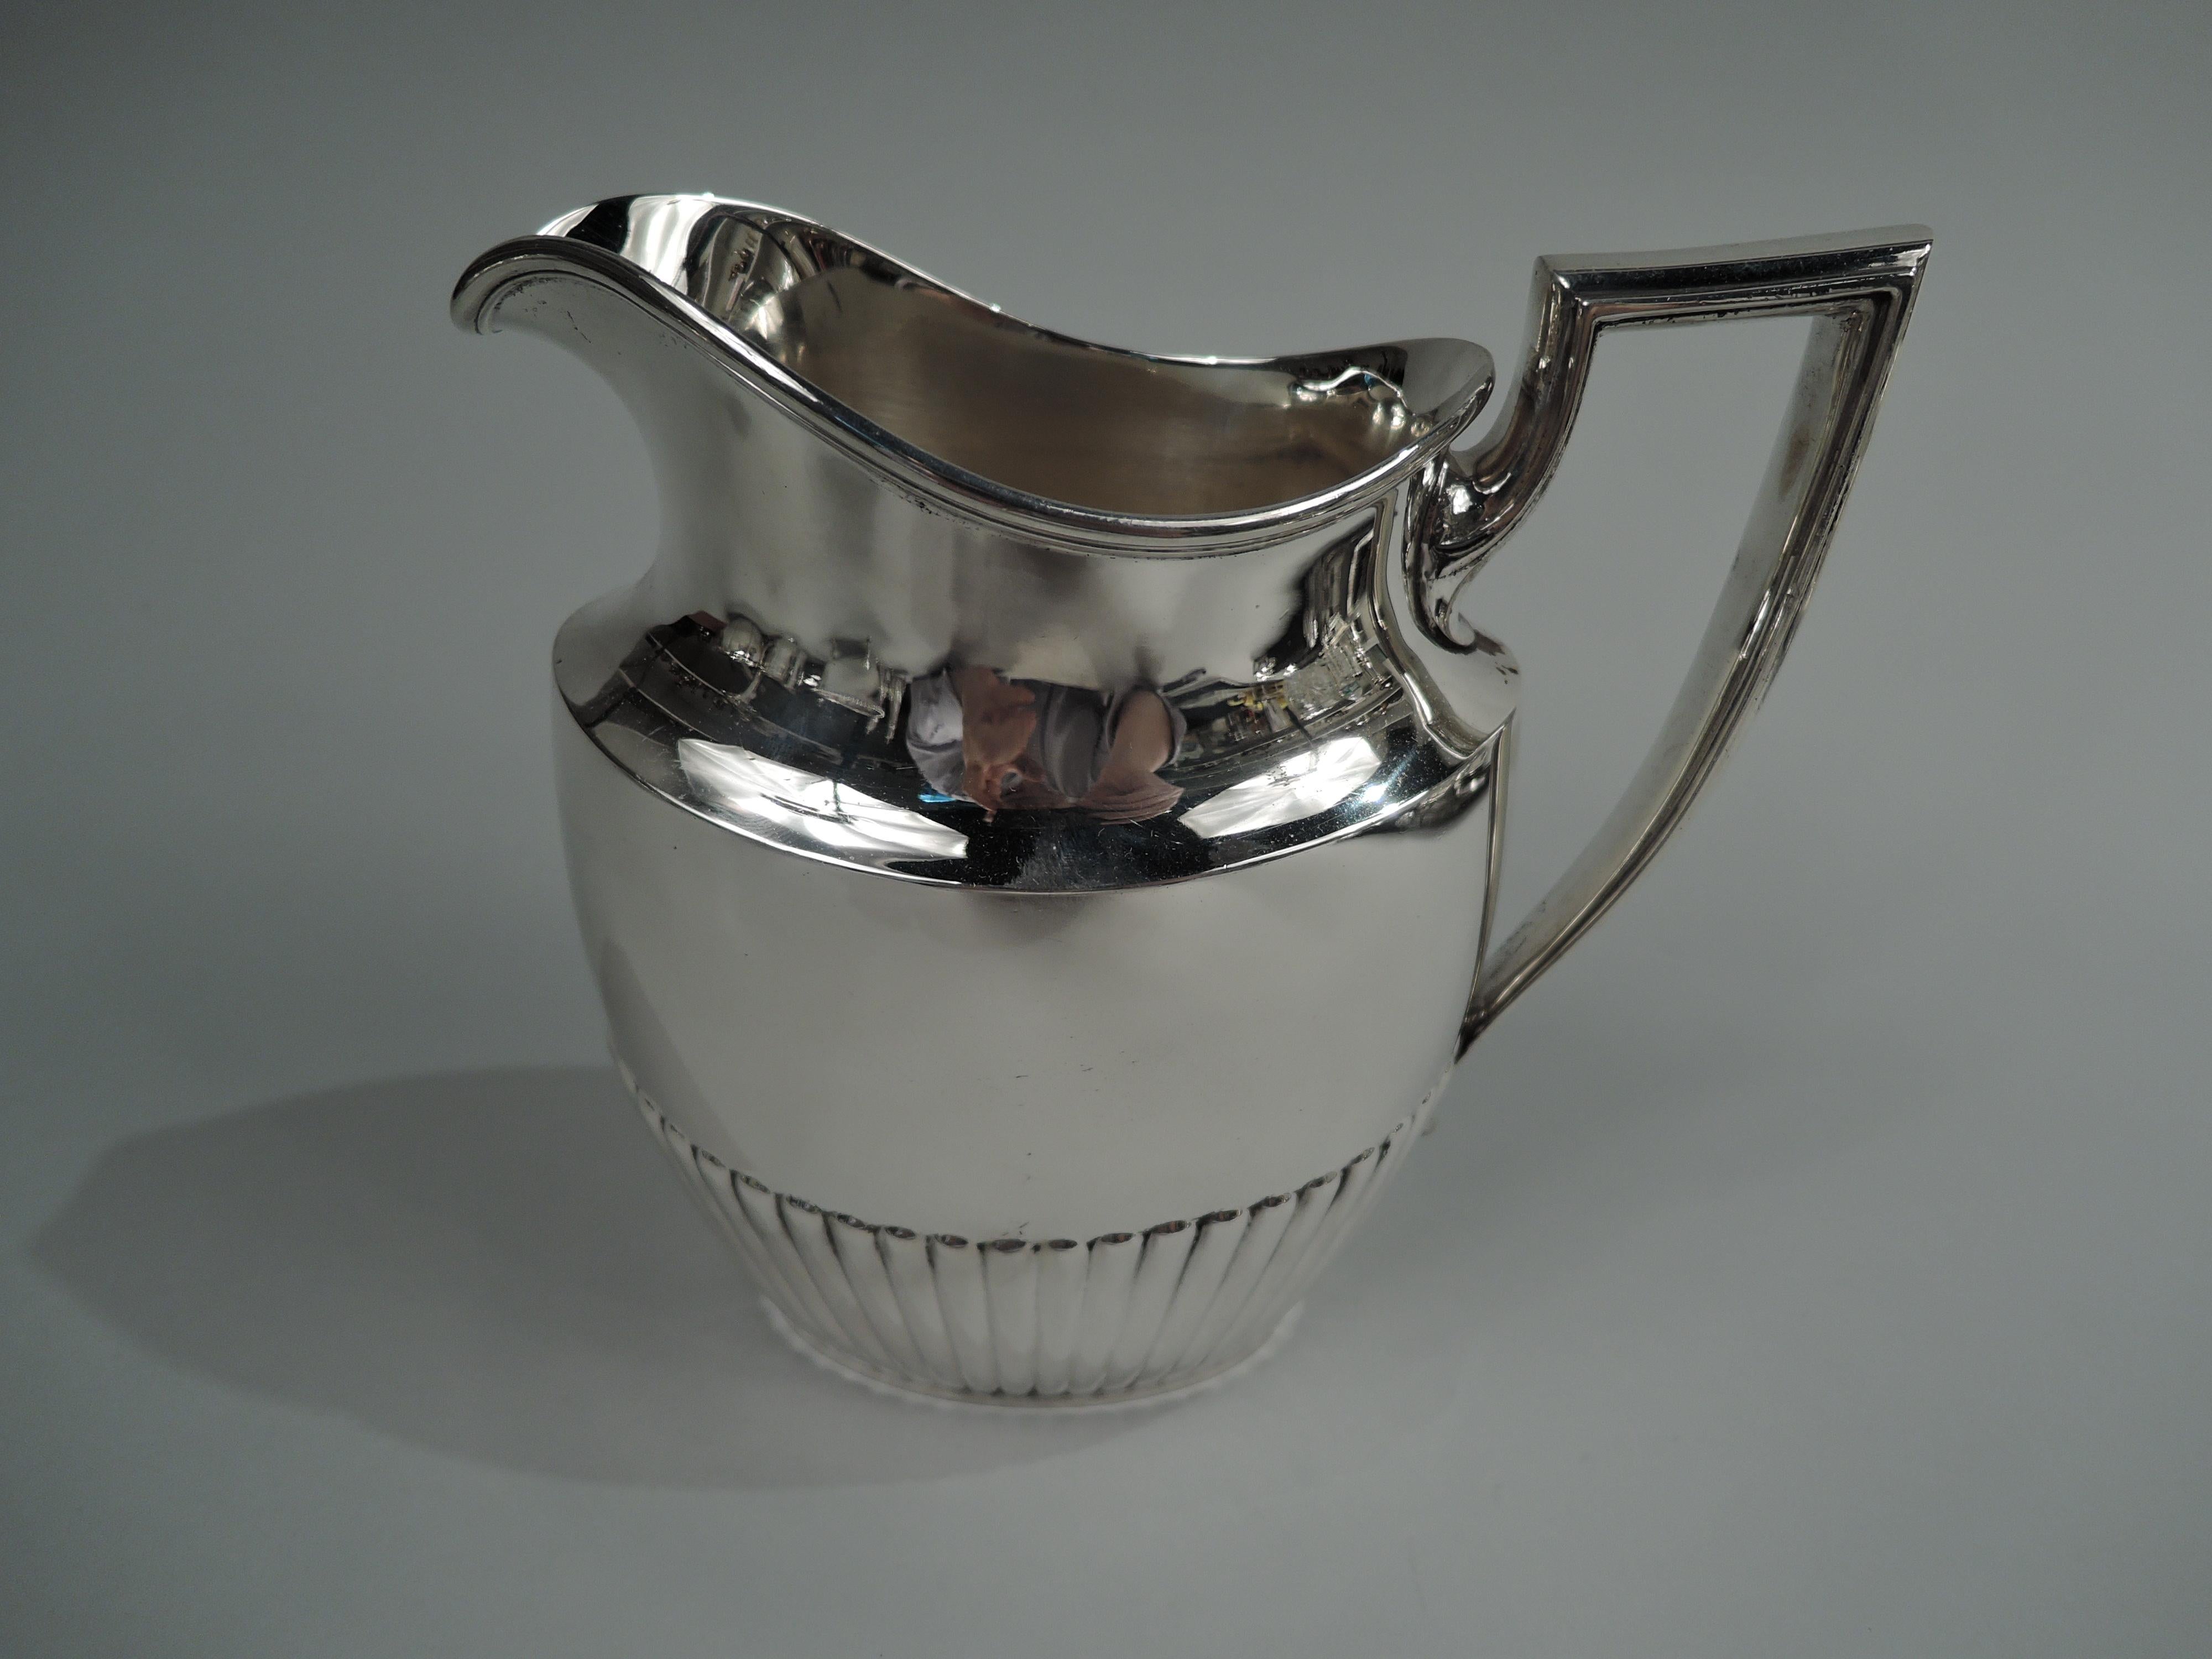 Edwardian Classical sterling silver creamer. Made by Whiting Manufacturing Co. in New York, ca 1910. Ovoid with helmet mouth and scroll bracket handle. Half gadrooning. Fully marked including maker’s stamp and no. 5014, letters SML, and volume (2